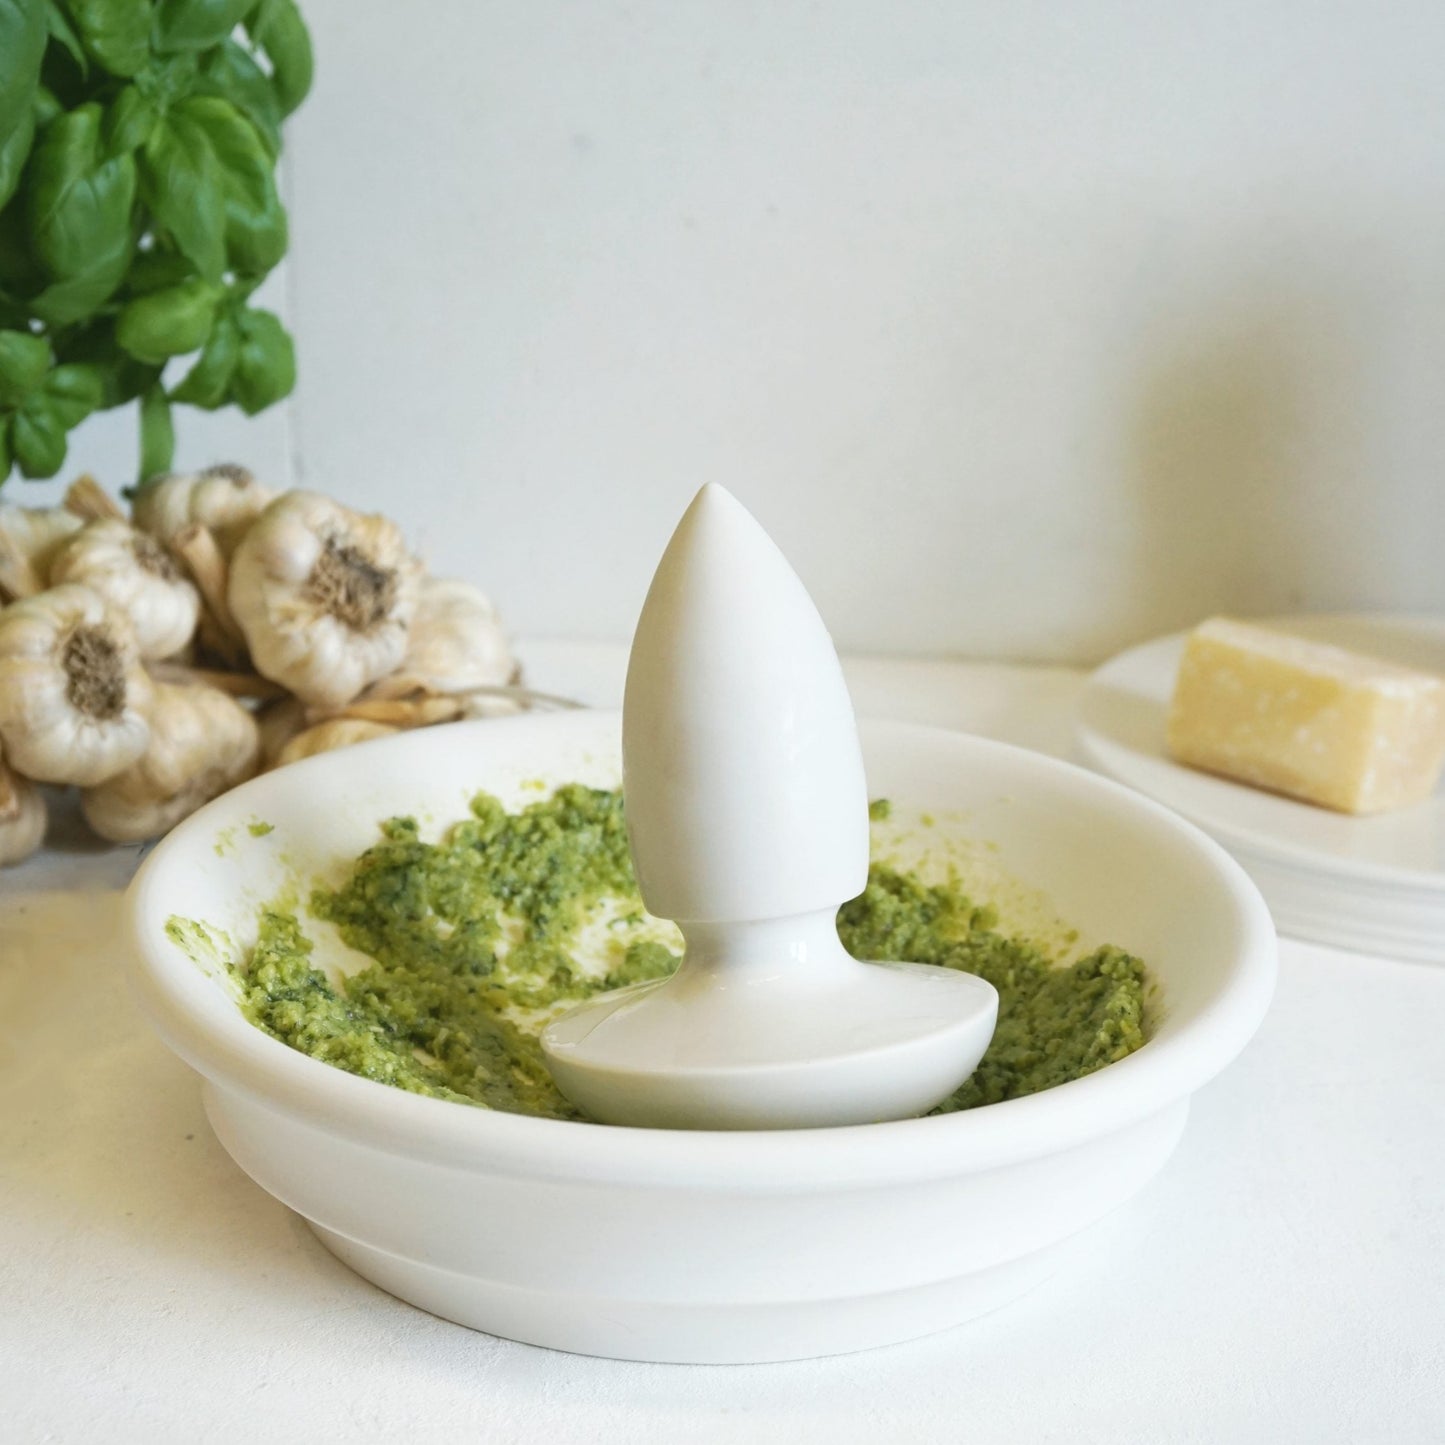 Spear Pestle and Bowl Mortar with Pesto